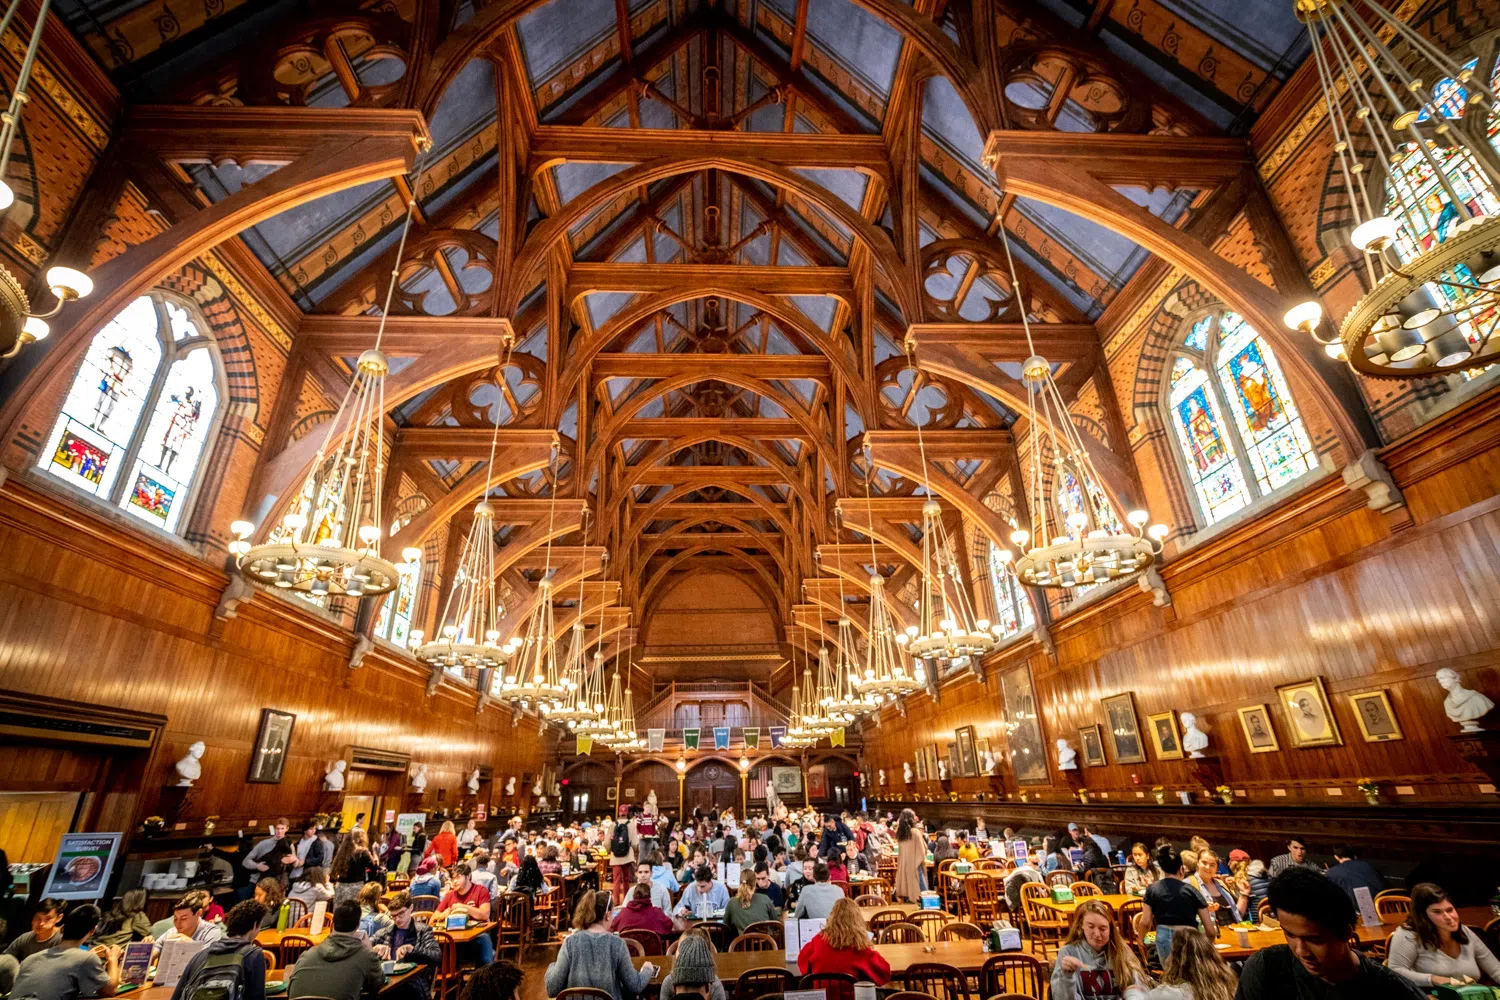 Students dine at tables in Annenberg Hall, with chandeliers and stained glassed windows.